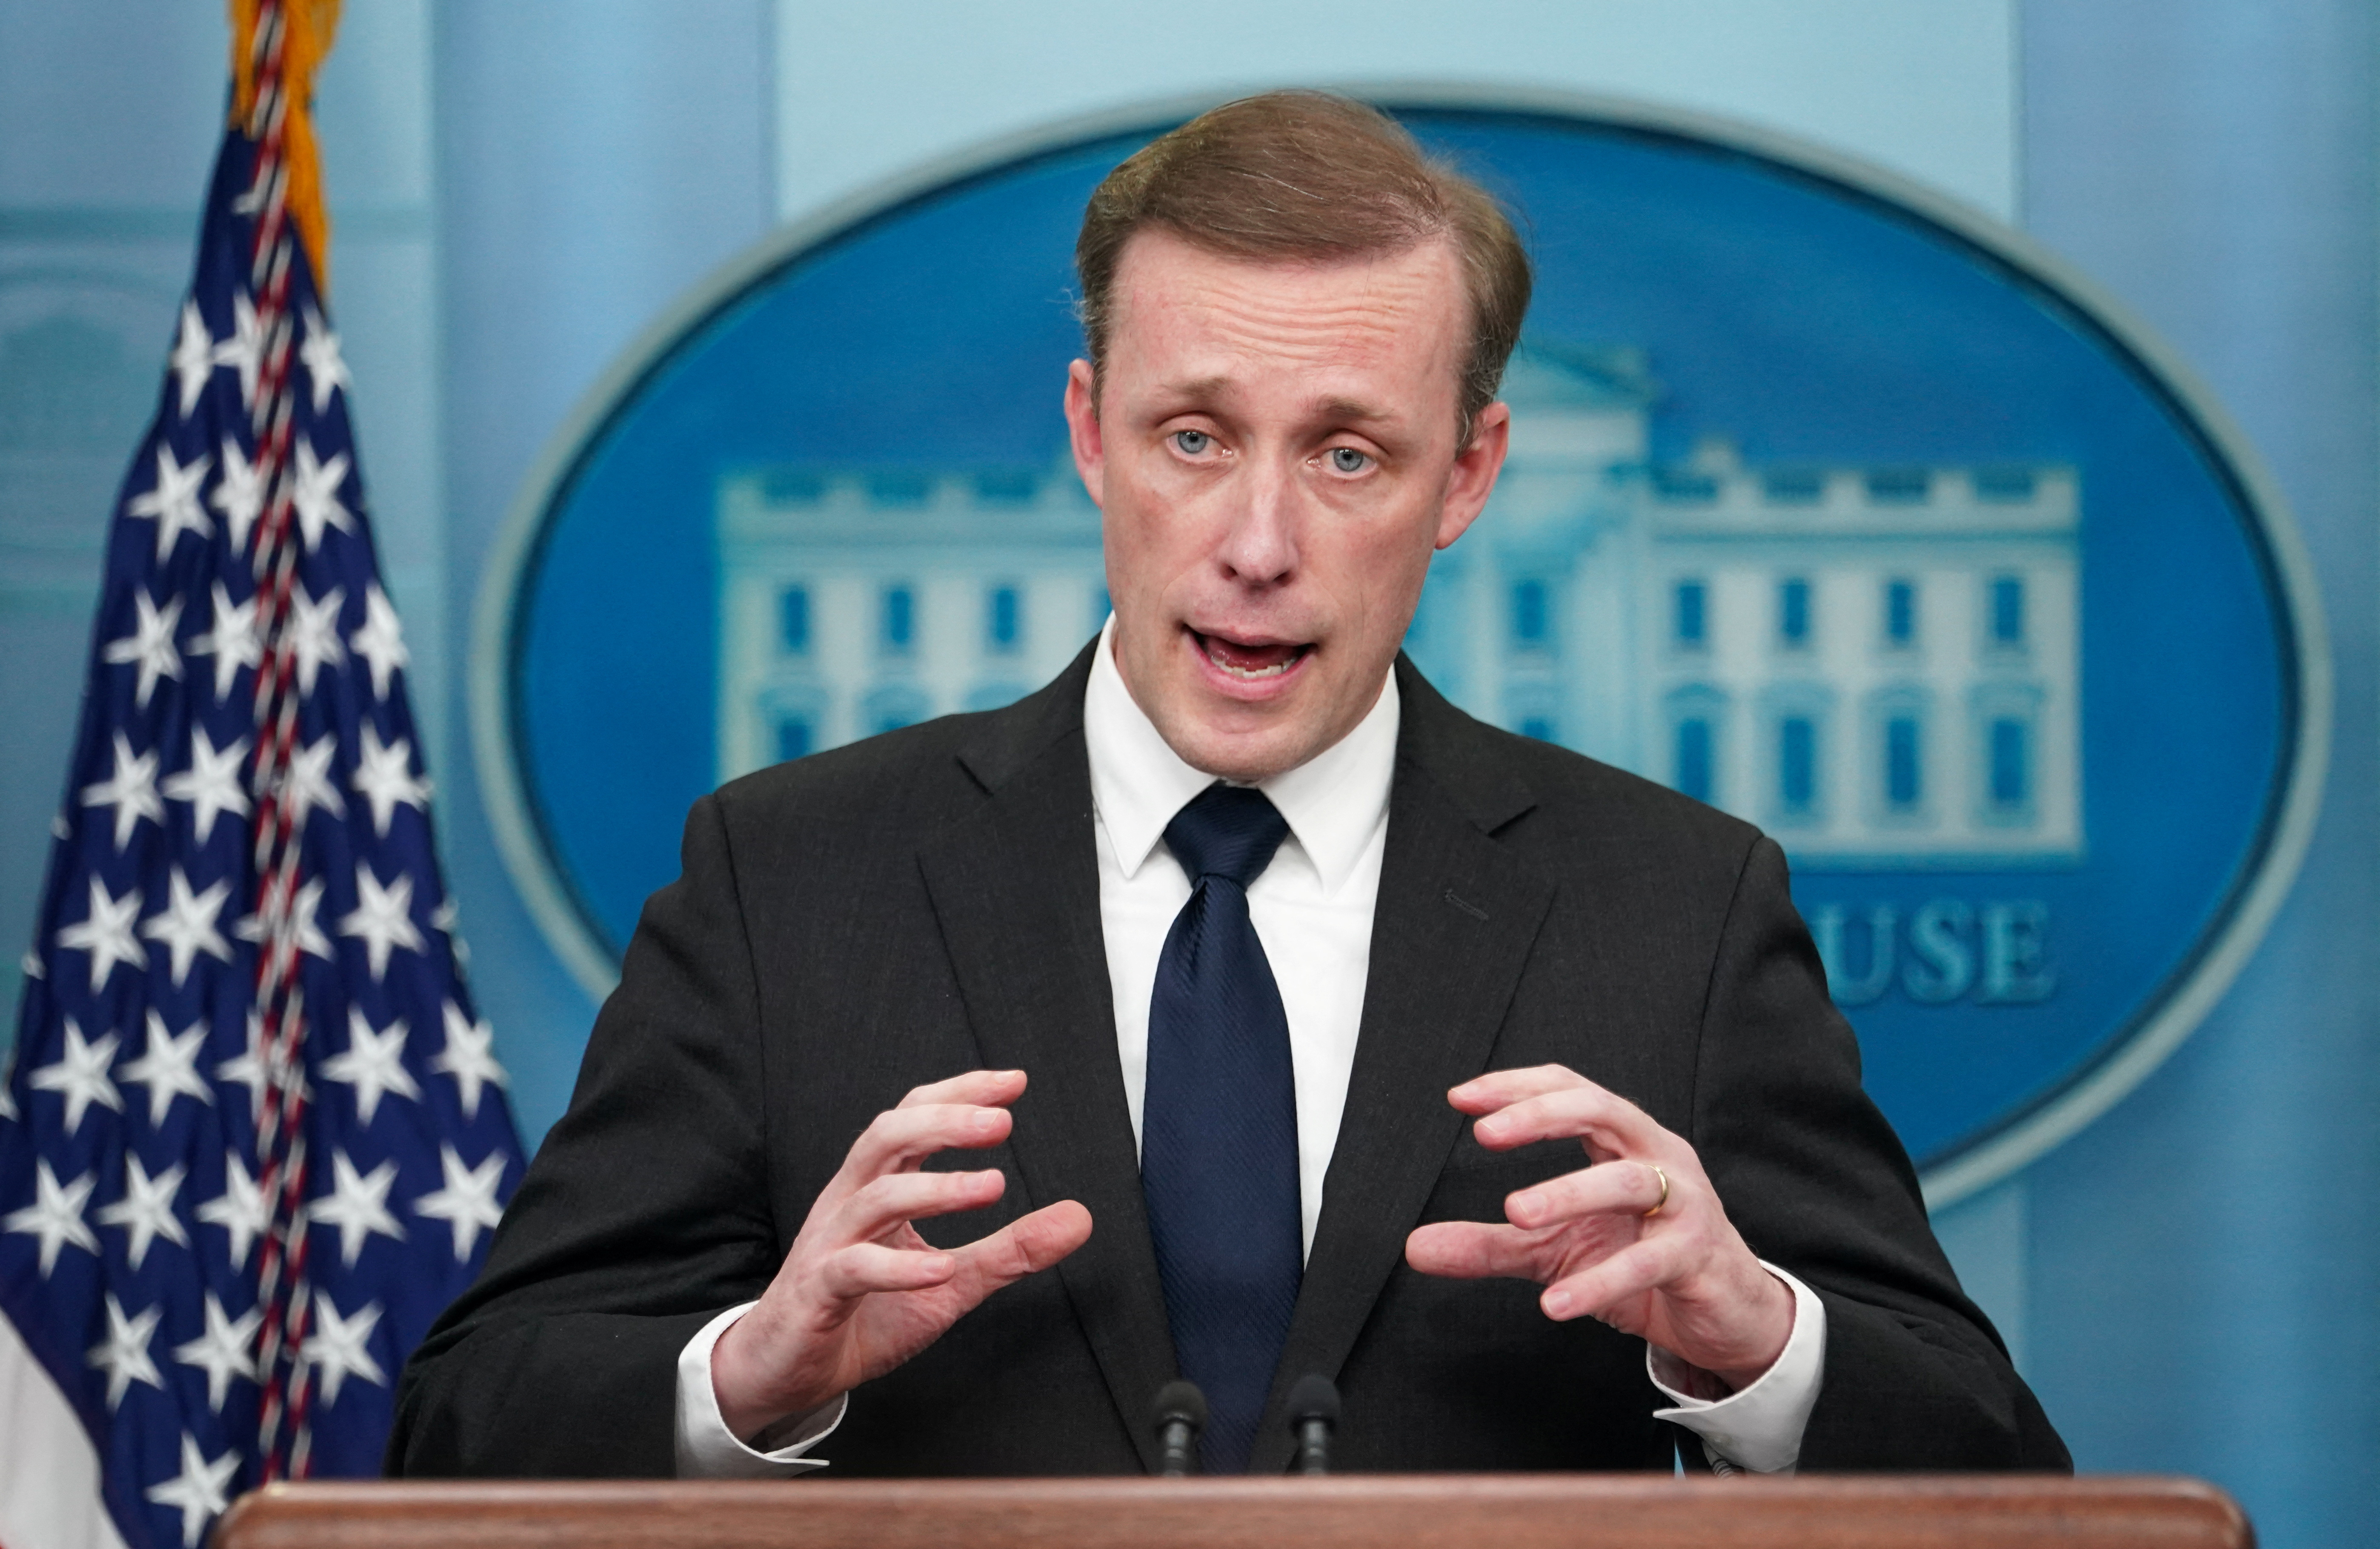 Jake Sullivan speaks at a press briefing at the White House in Washington